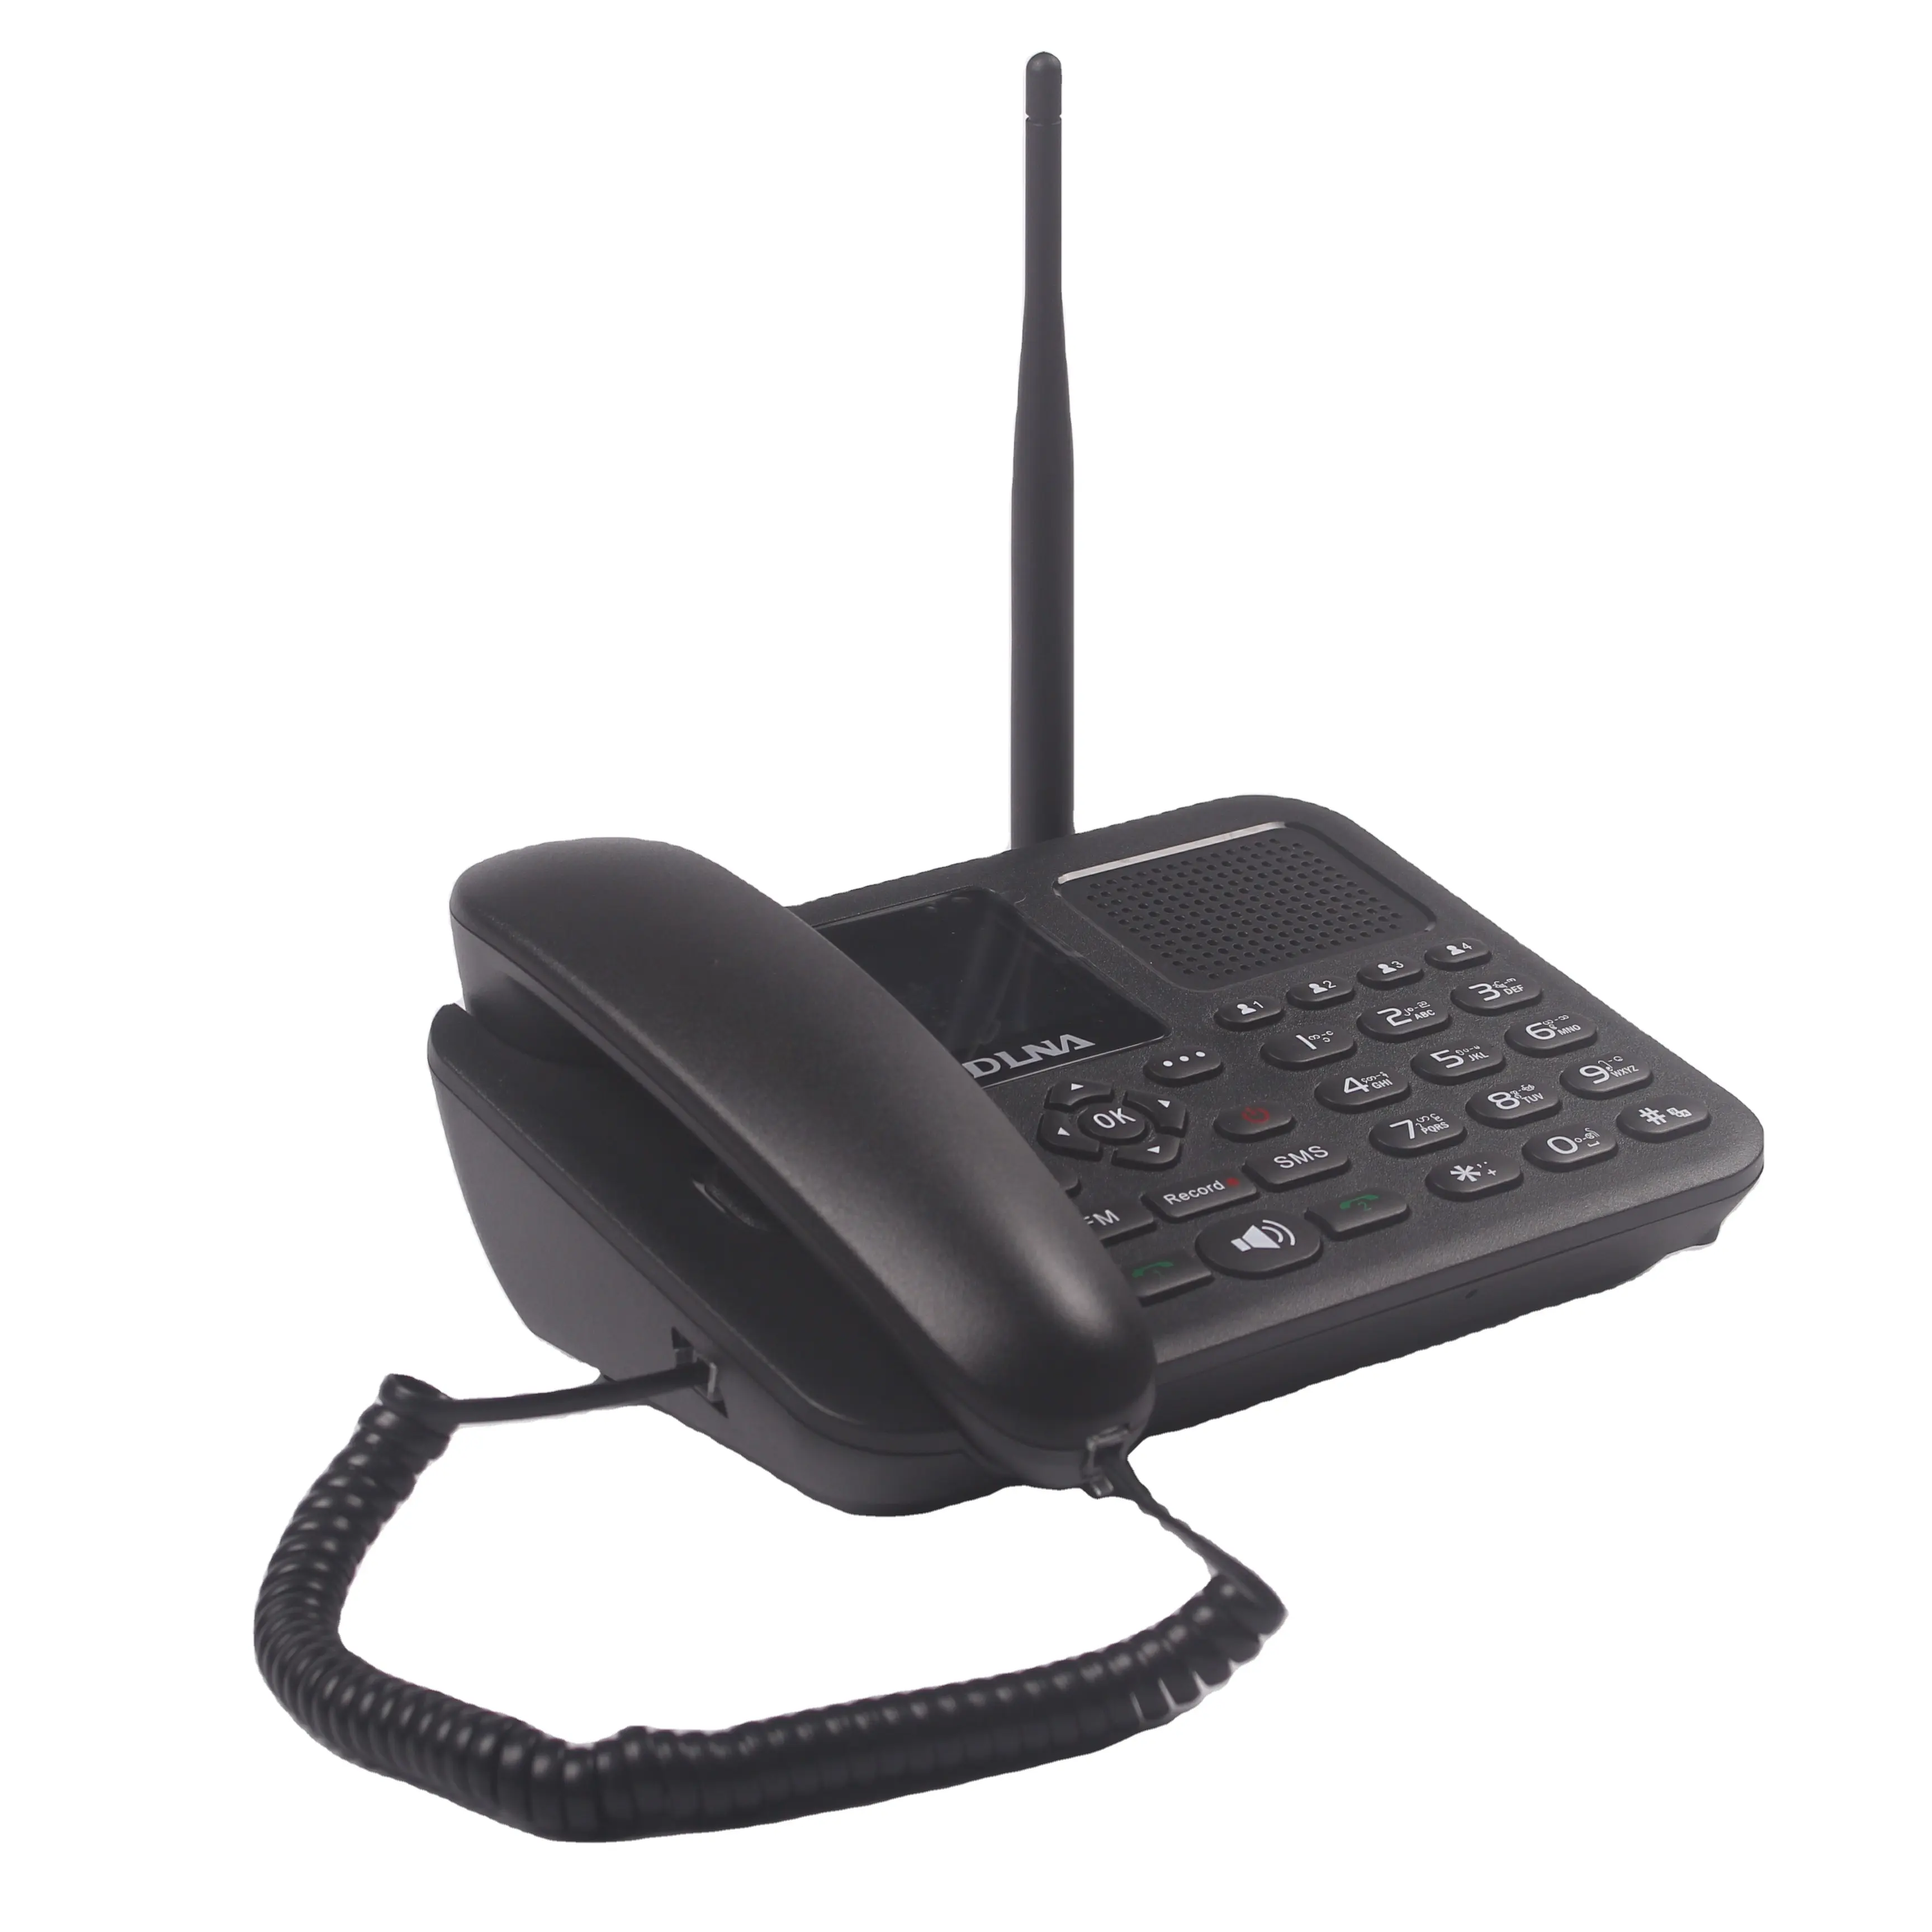 Wireless telephone DLNA ZT9000 Quad-band gsm desktop phone with dual sim for home office